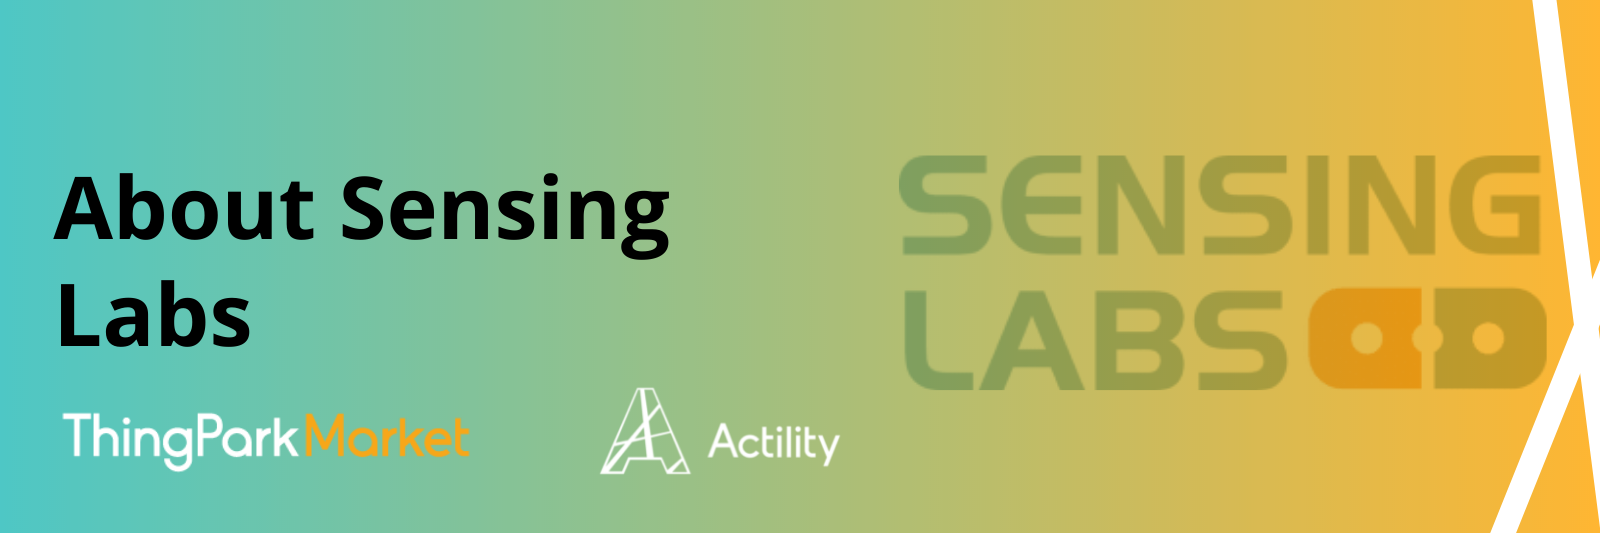 About Sensing Labs